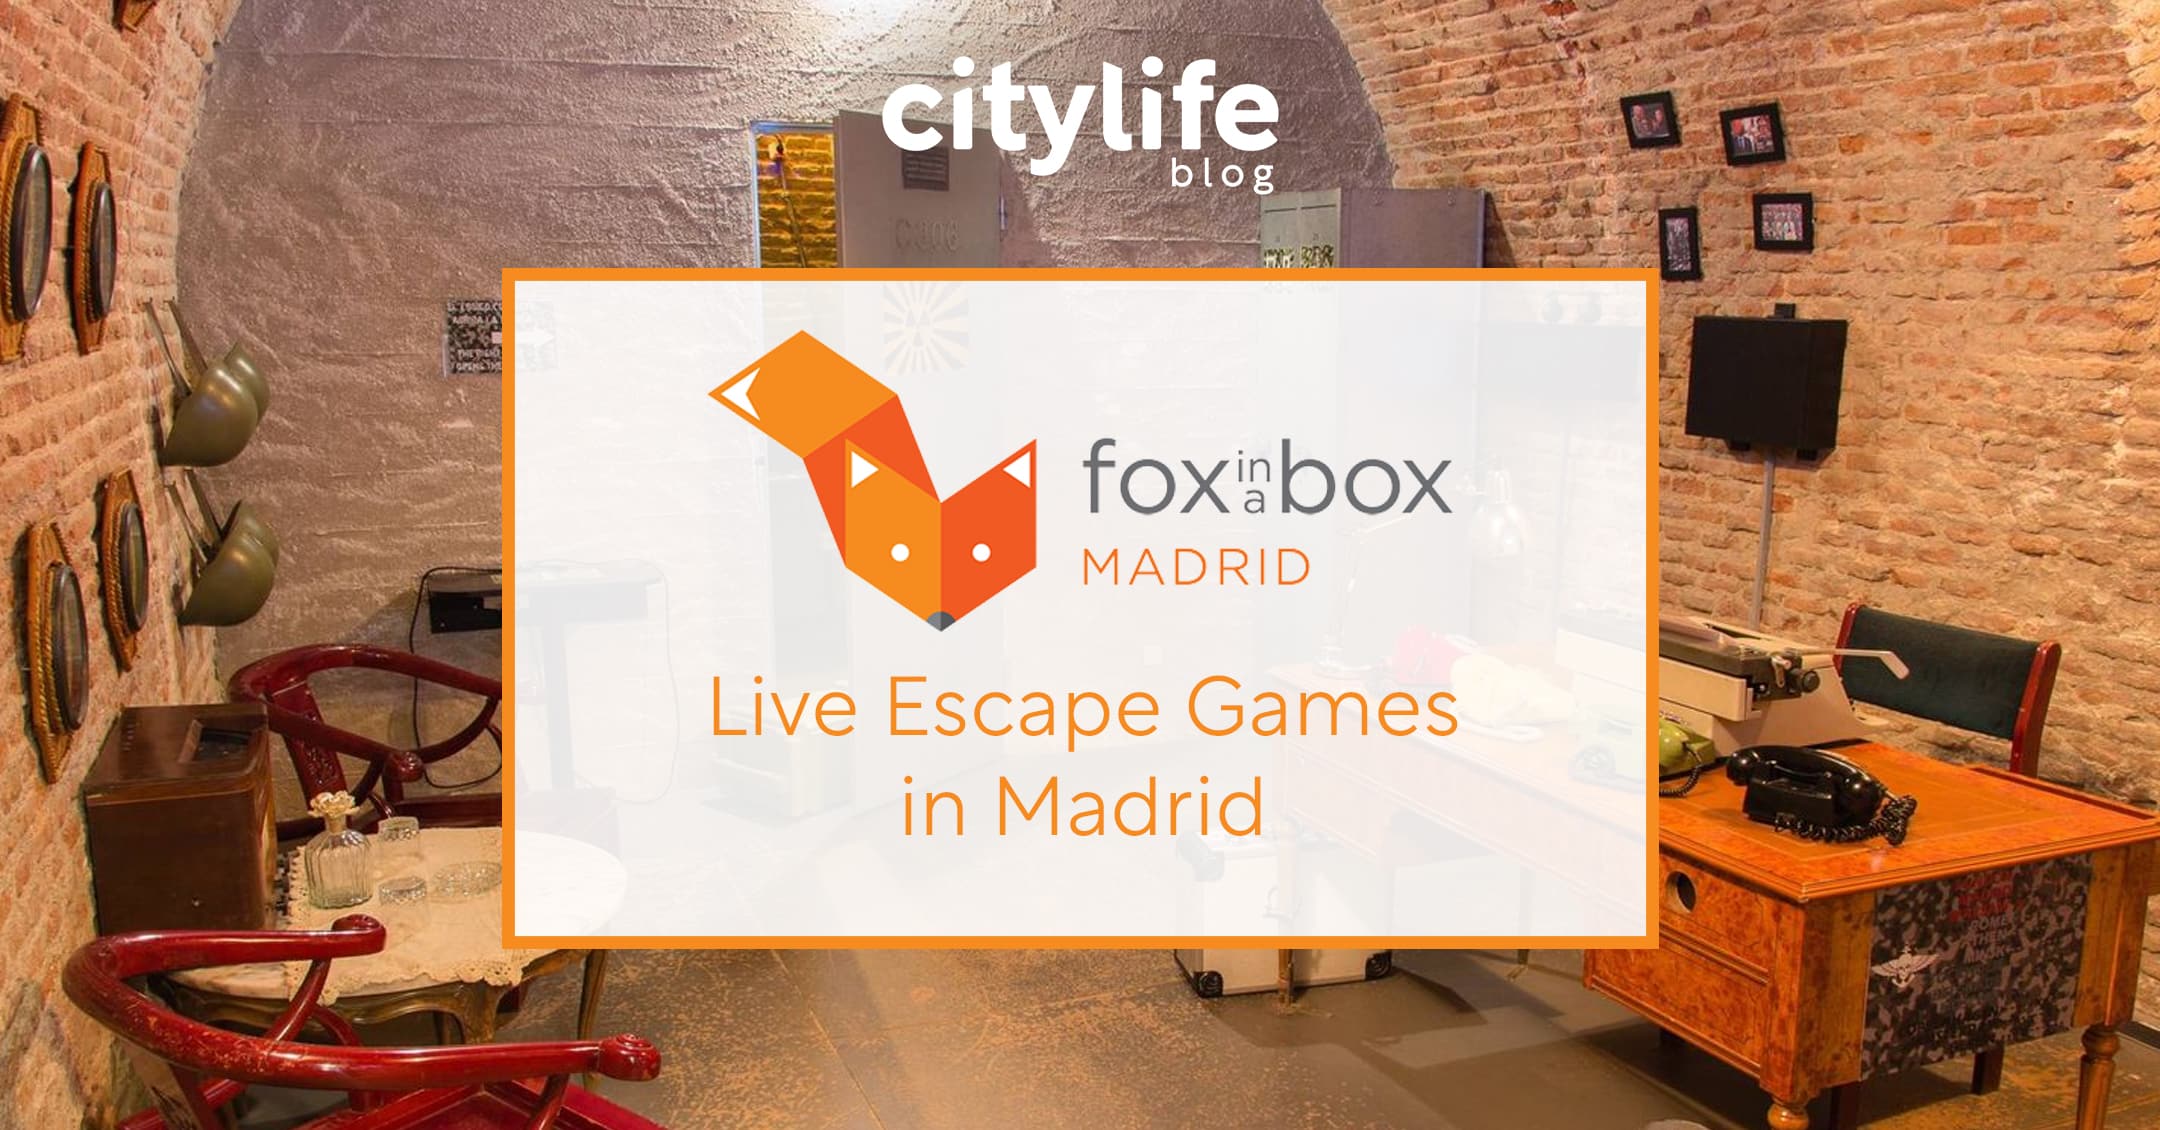 featured-image-fox-in-a-box-escape-games-citylife-madrid